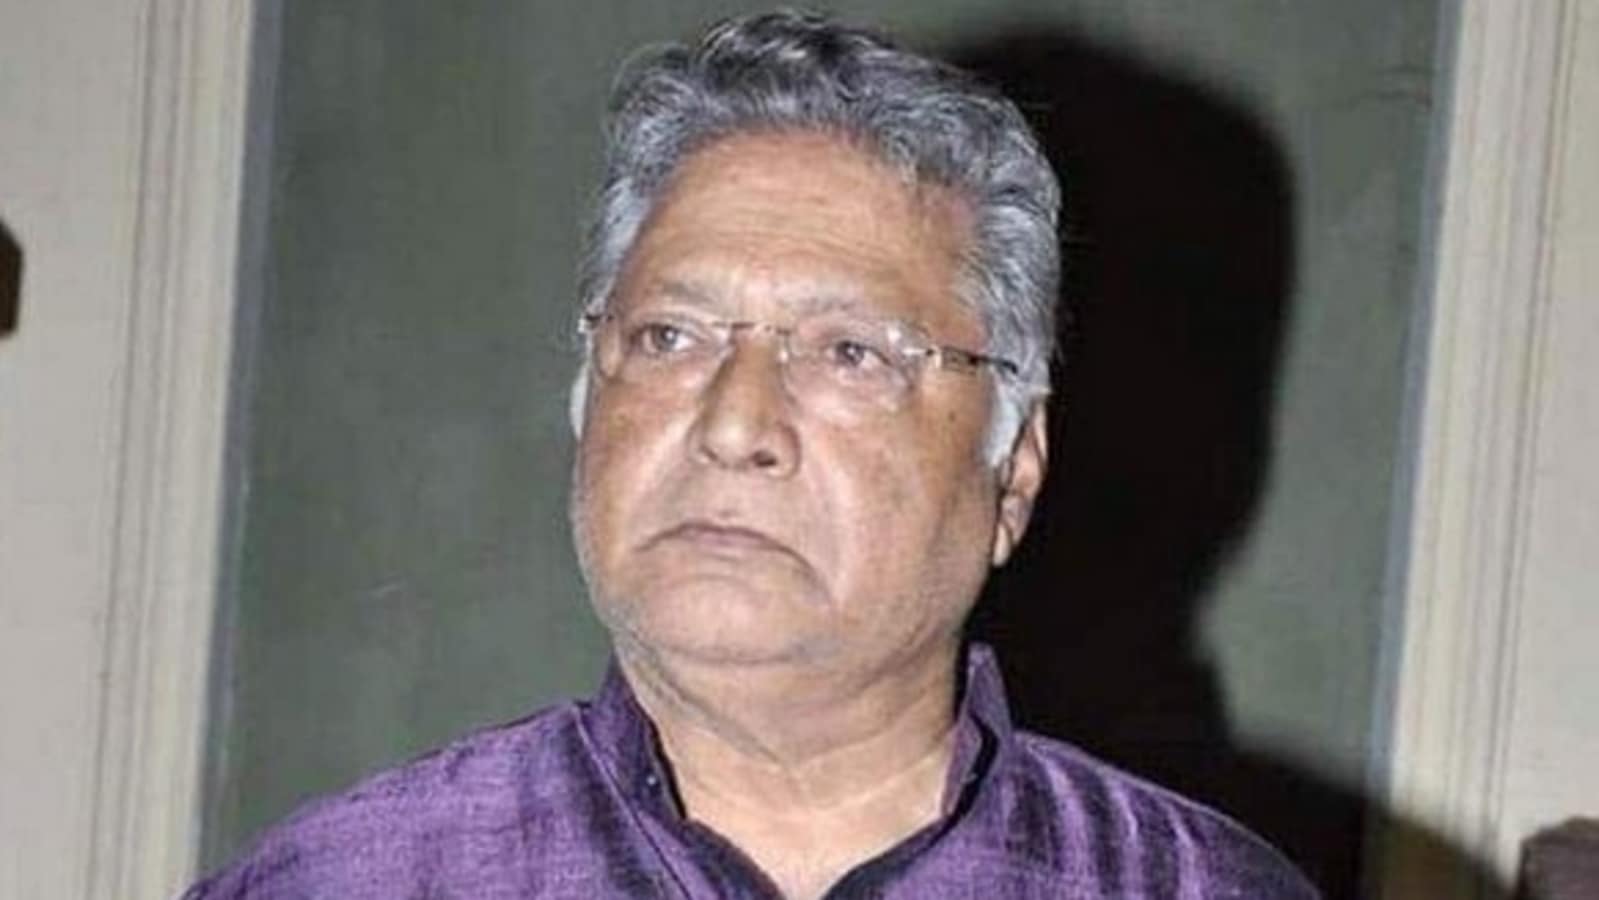 Vikram Gokhale critical since last 24 hours, says wife Vrushali Gokhale: ‘Not responding to treatment as expected’